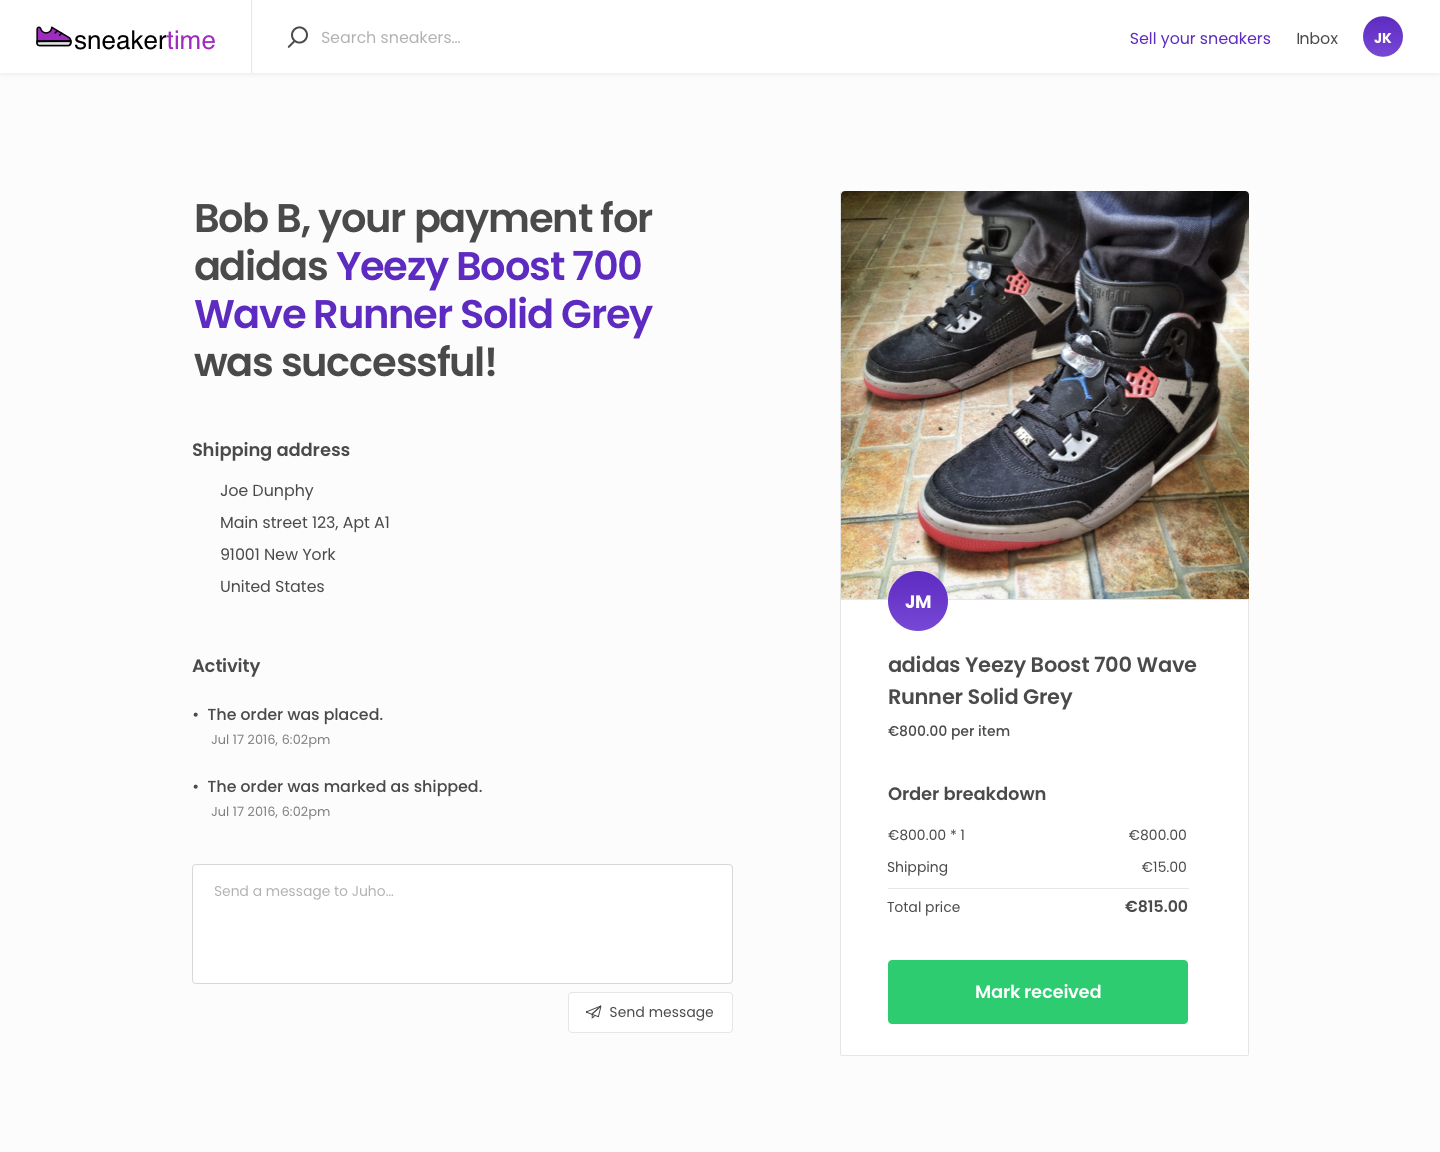 Sneakertime transaction page, provider’s view